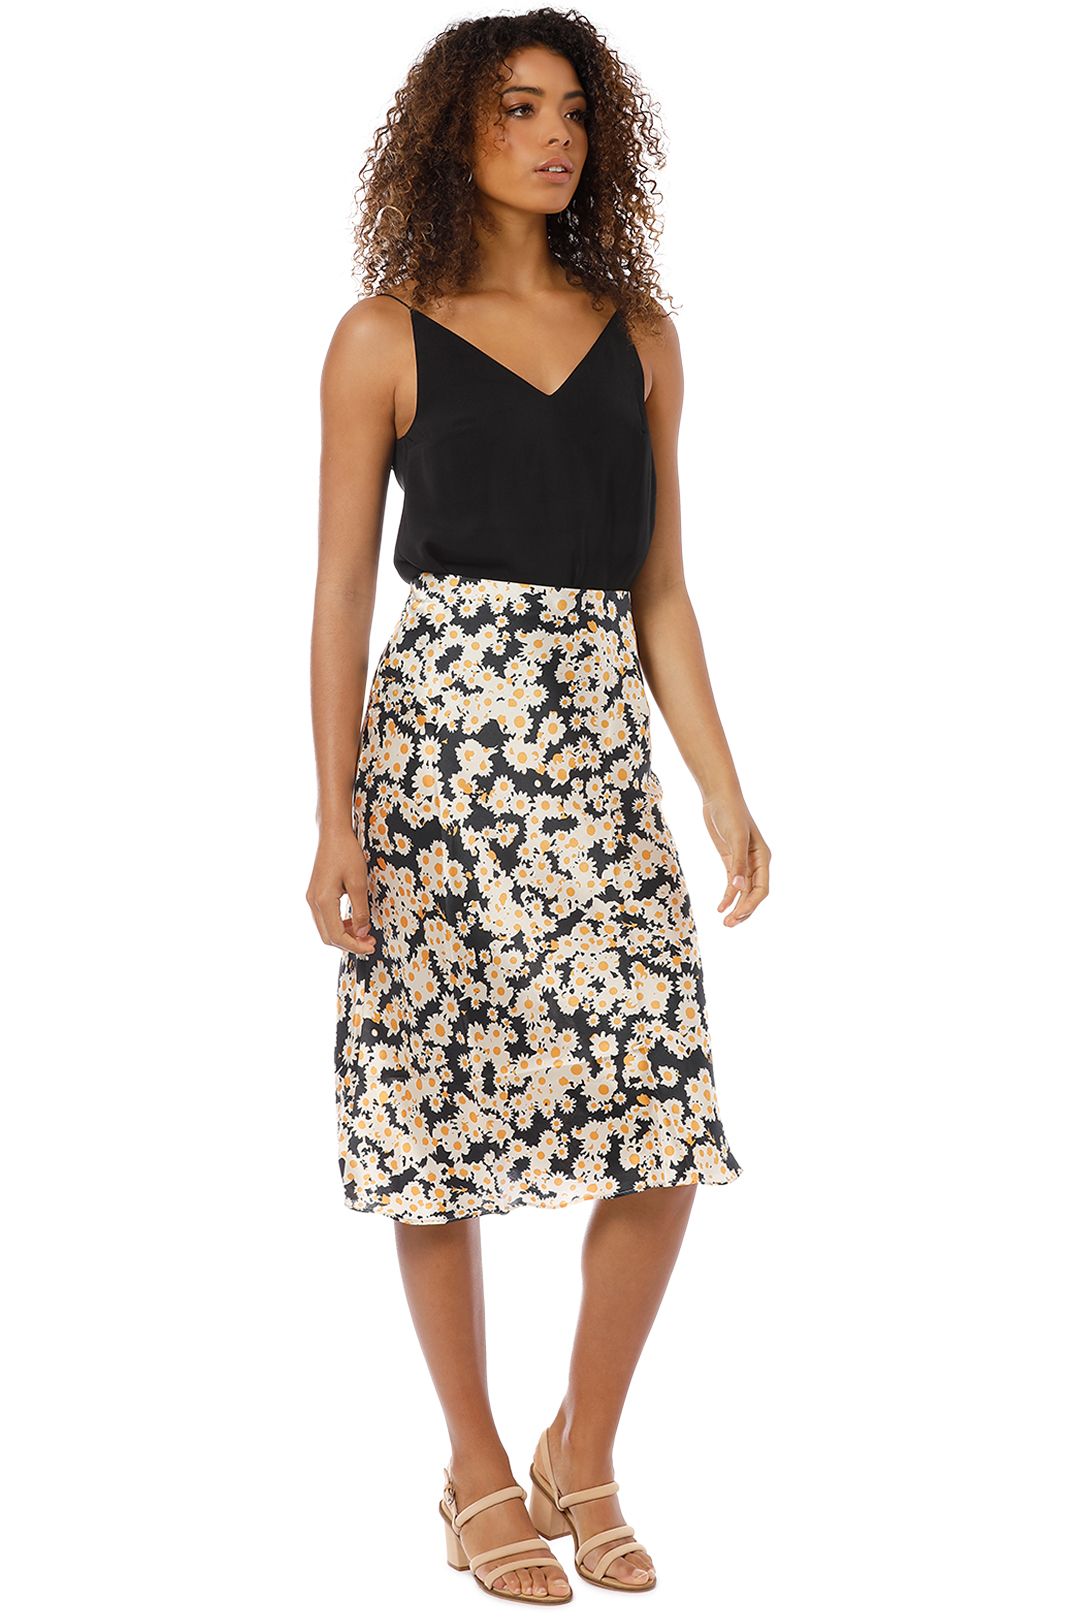 The Naomi Skirt in Flower Power by Realisation Par for Hire